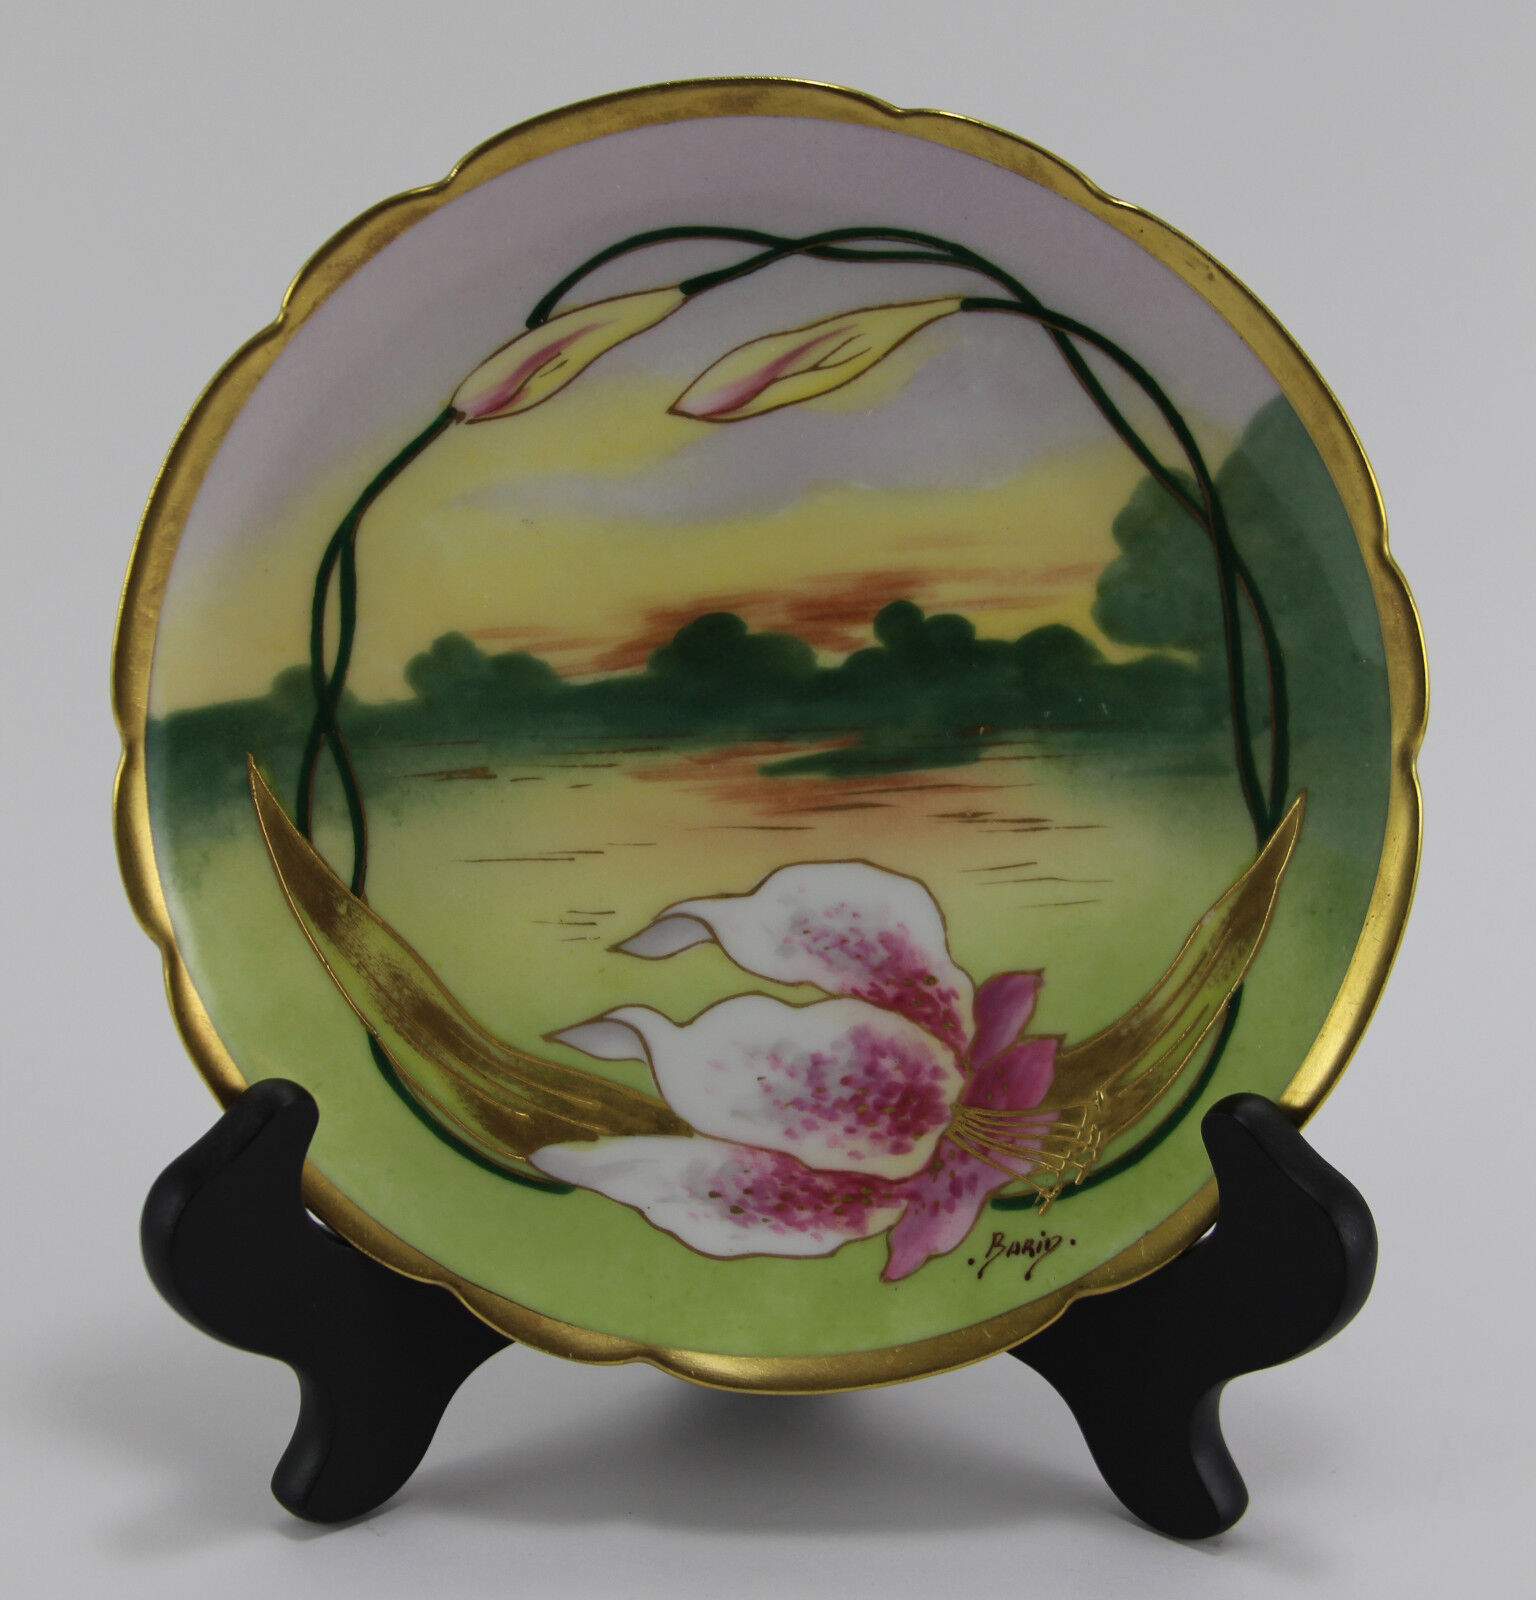 Beautiful Limoges Plate Hand Painted with Lilies - Signed Barin - Mavaleix, Mand